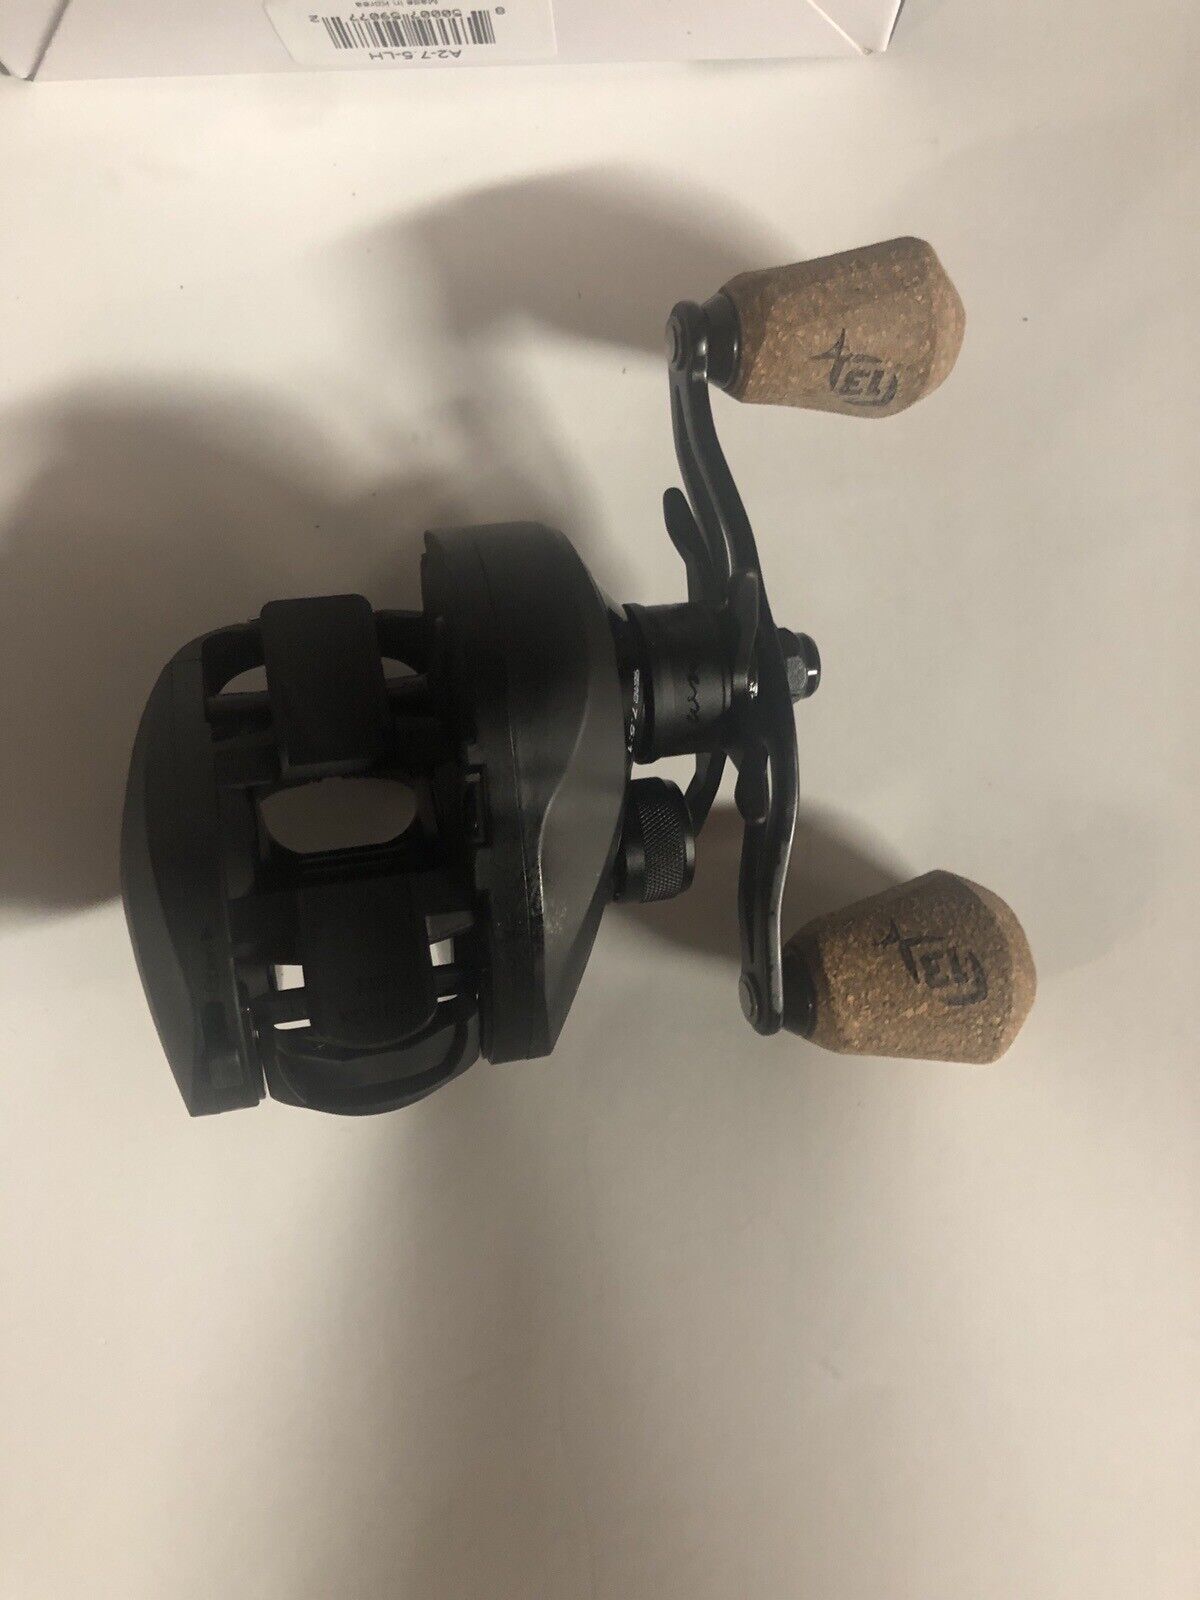 13 Fishing Concept A2 7.5 1 Left Hand Casting Reel for sale online